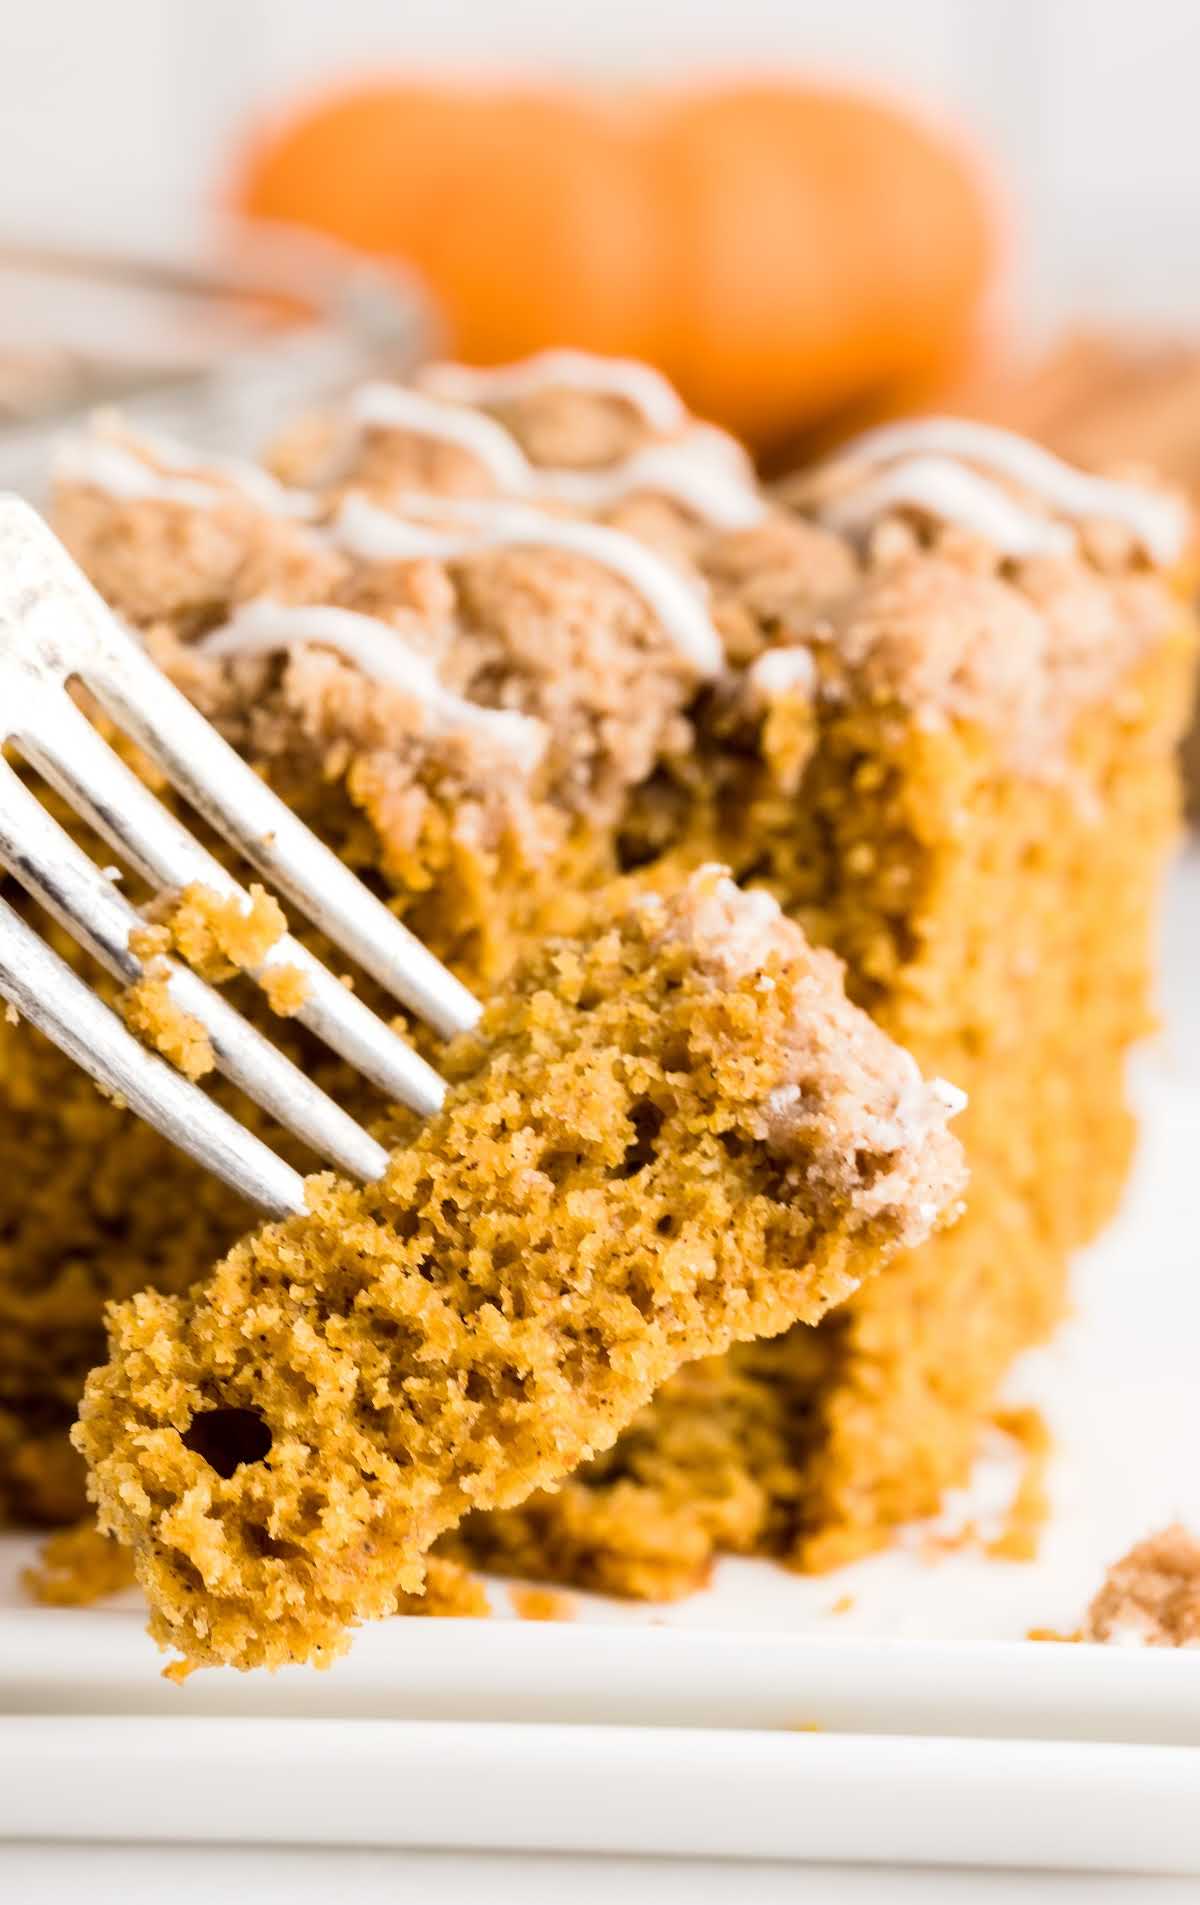 a close up shot of a slice of Pumpkin Coffee Cake on a plate with a fork grabbing a piece